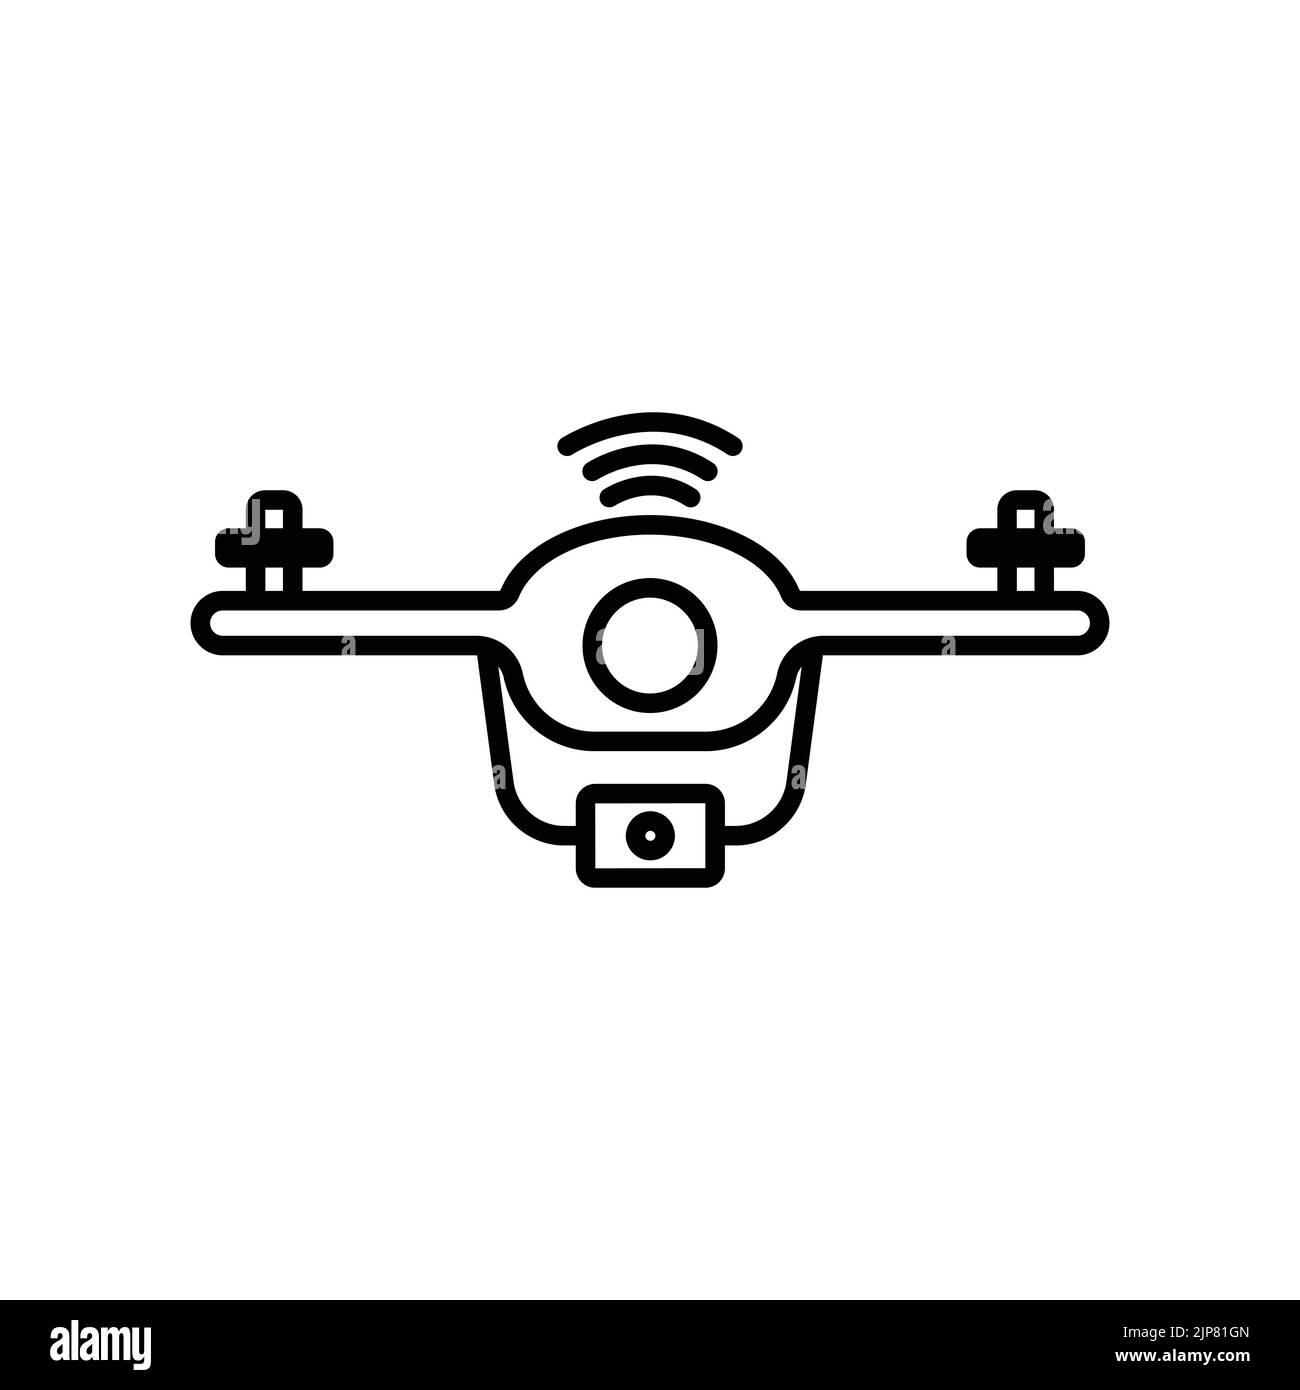 Drone icon. icon related to technology. smart device. drone with signal. line icon style. Simple design editable Stock Vector